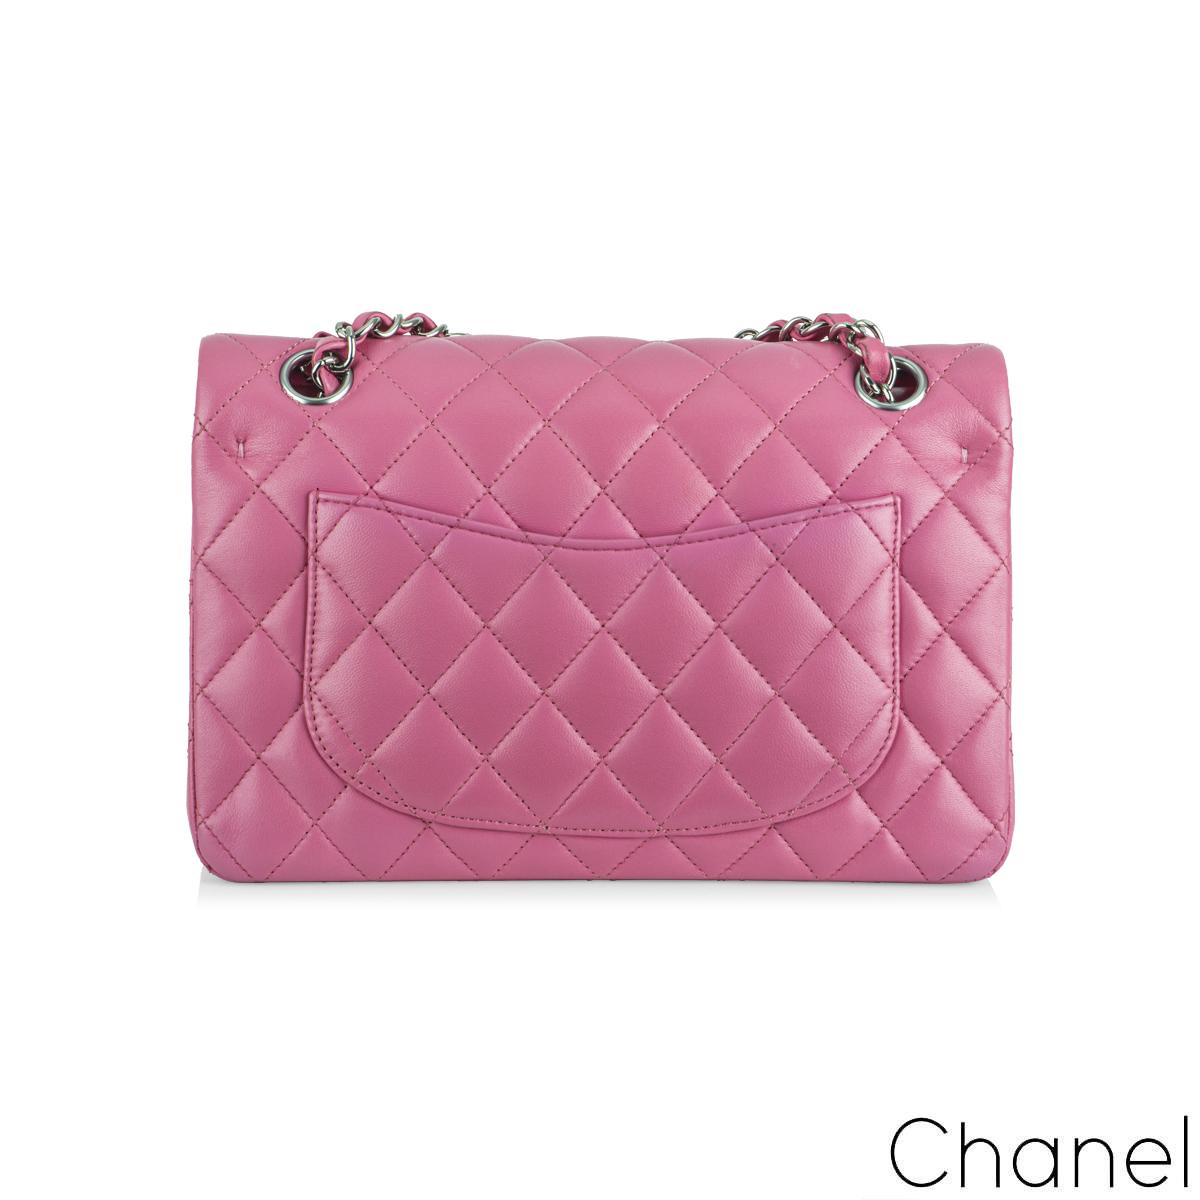 A Timeless Chanel Classic Small Flap Handbag. The exterior of this classic small flap is in vibrant pink lambskin leather with silver tone hardware. It features a front flap with a signature CC turn-lock closure, a half-moon back pocket, and an